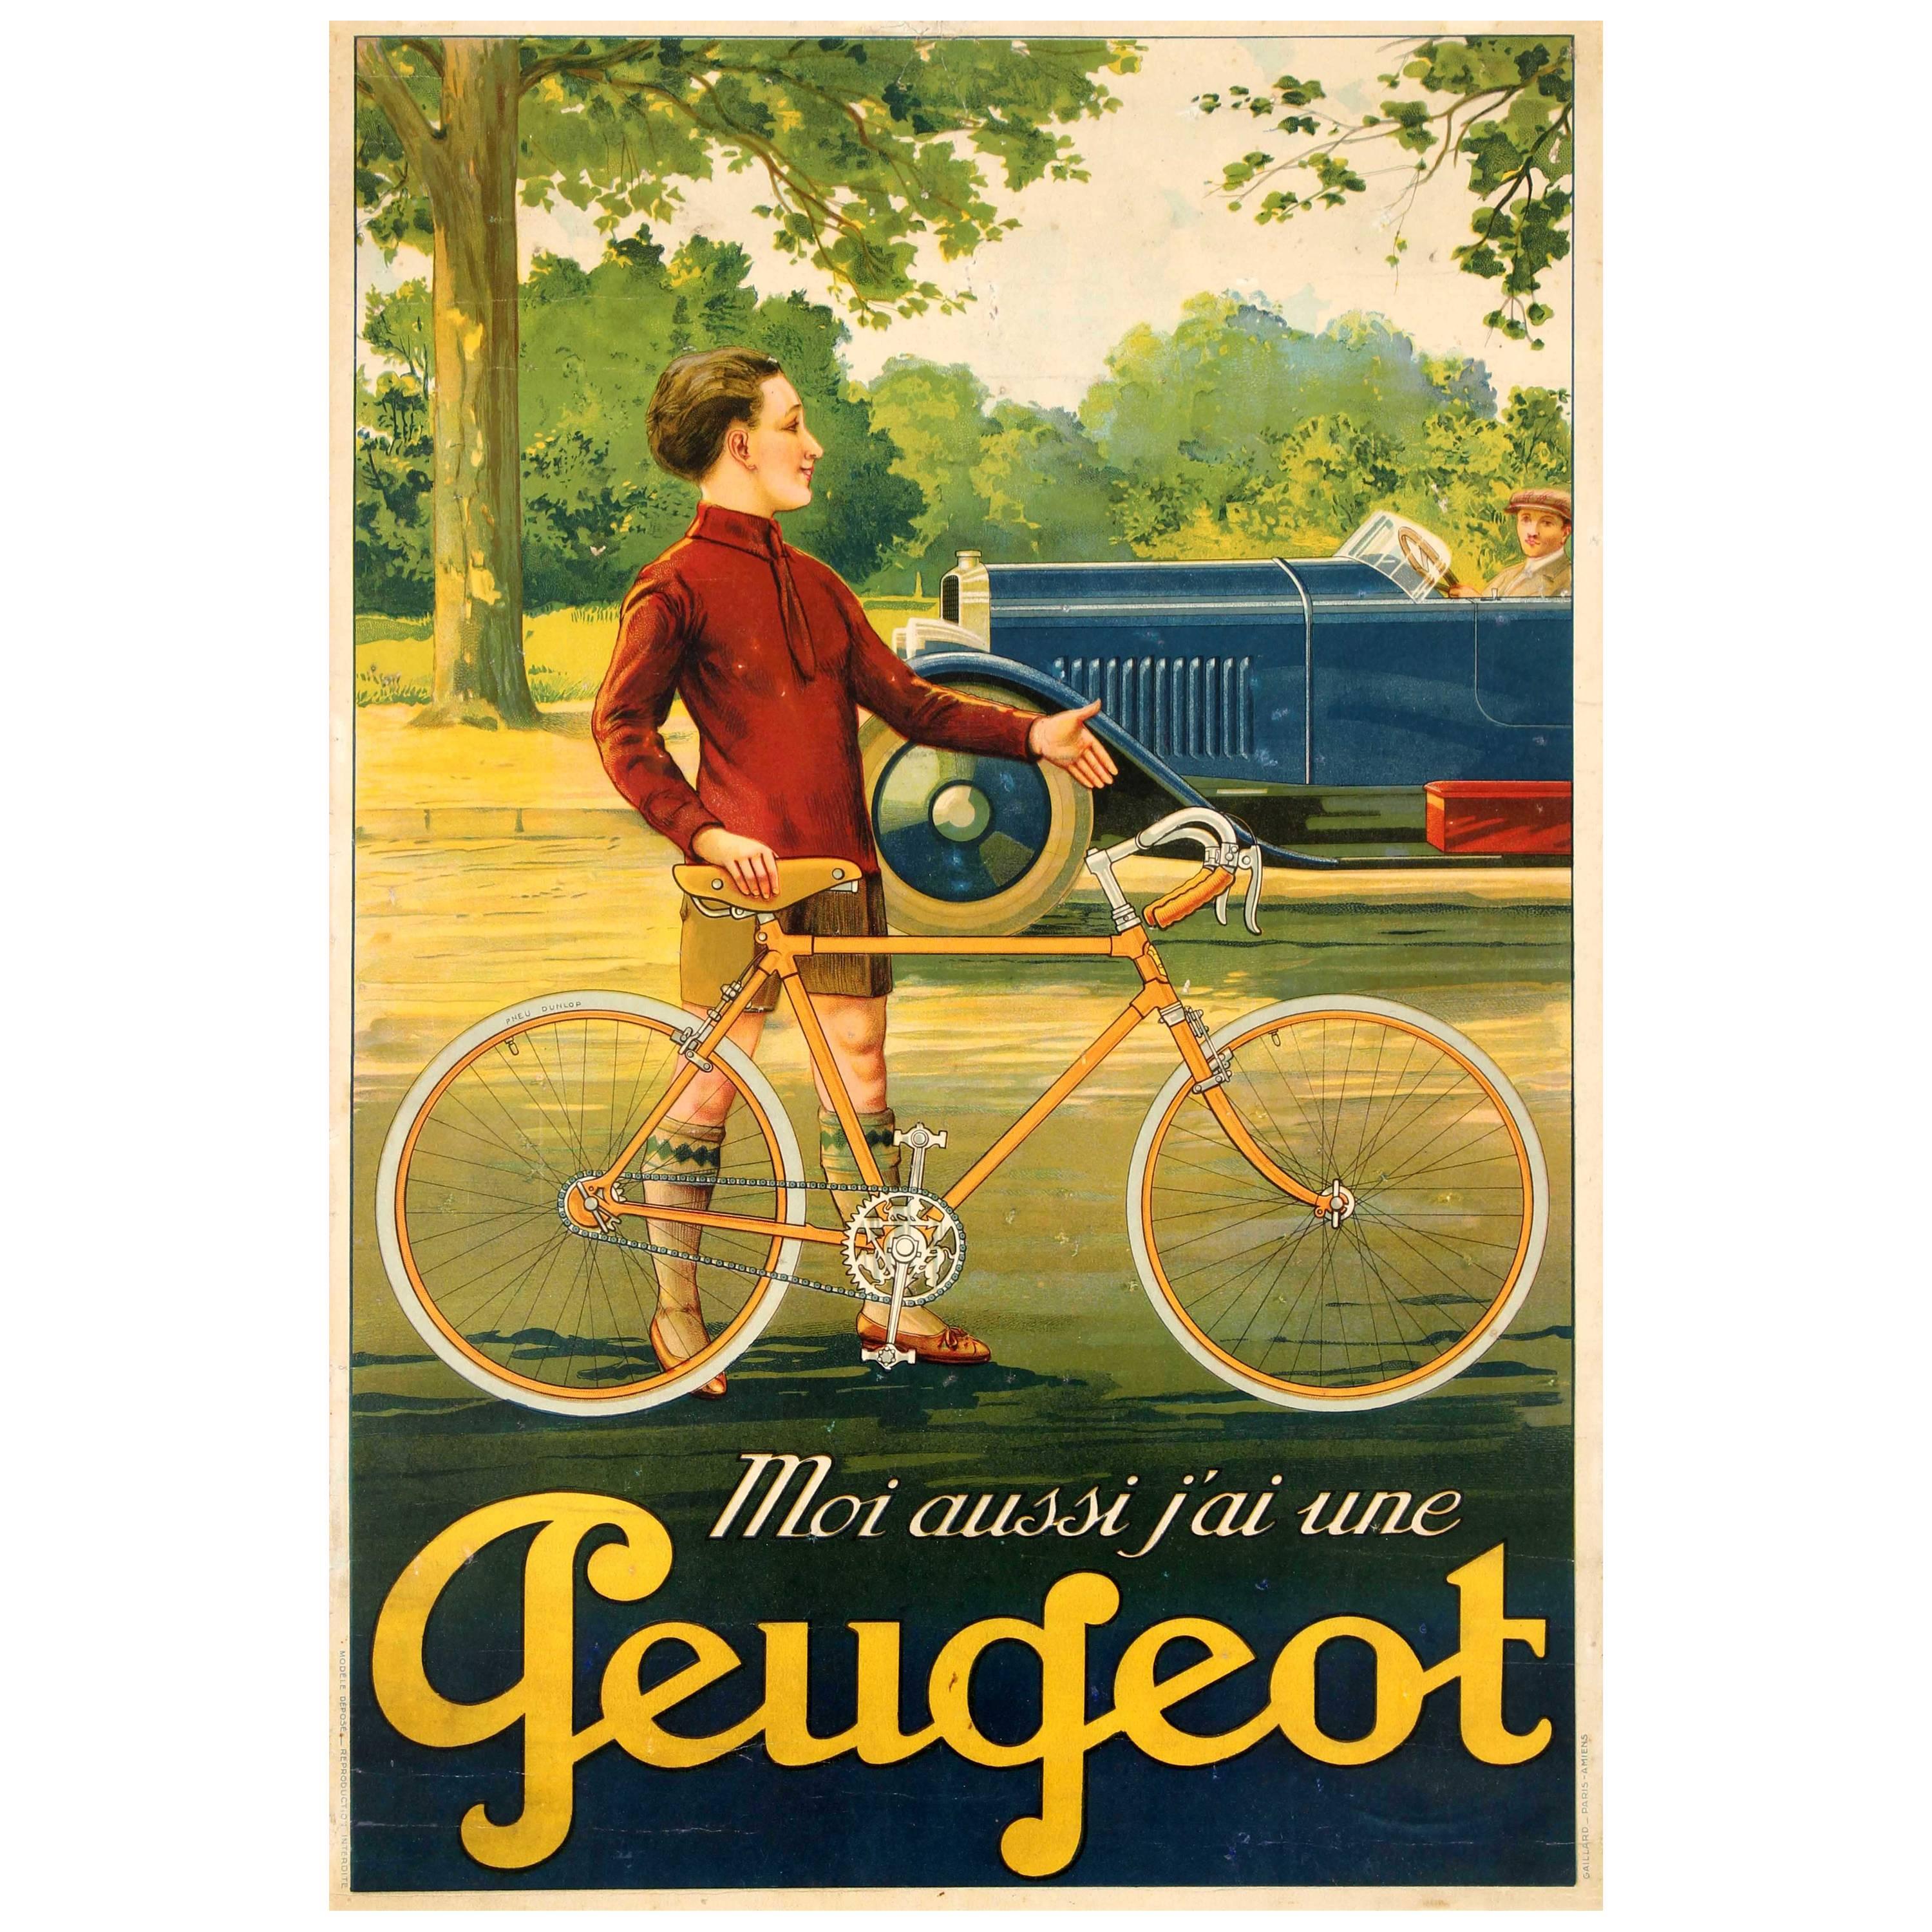 Original Vintage French Peugeot Bicycle Advertising Poster I Also Have a Peugeot